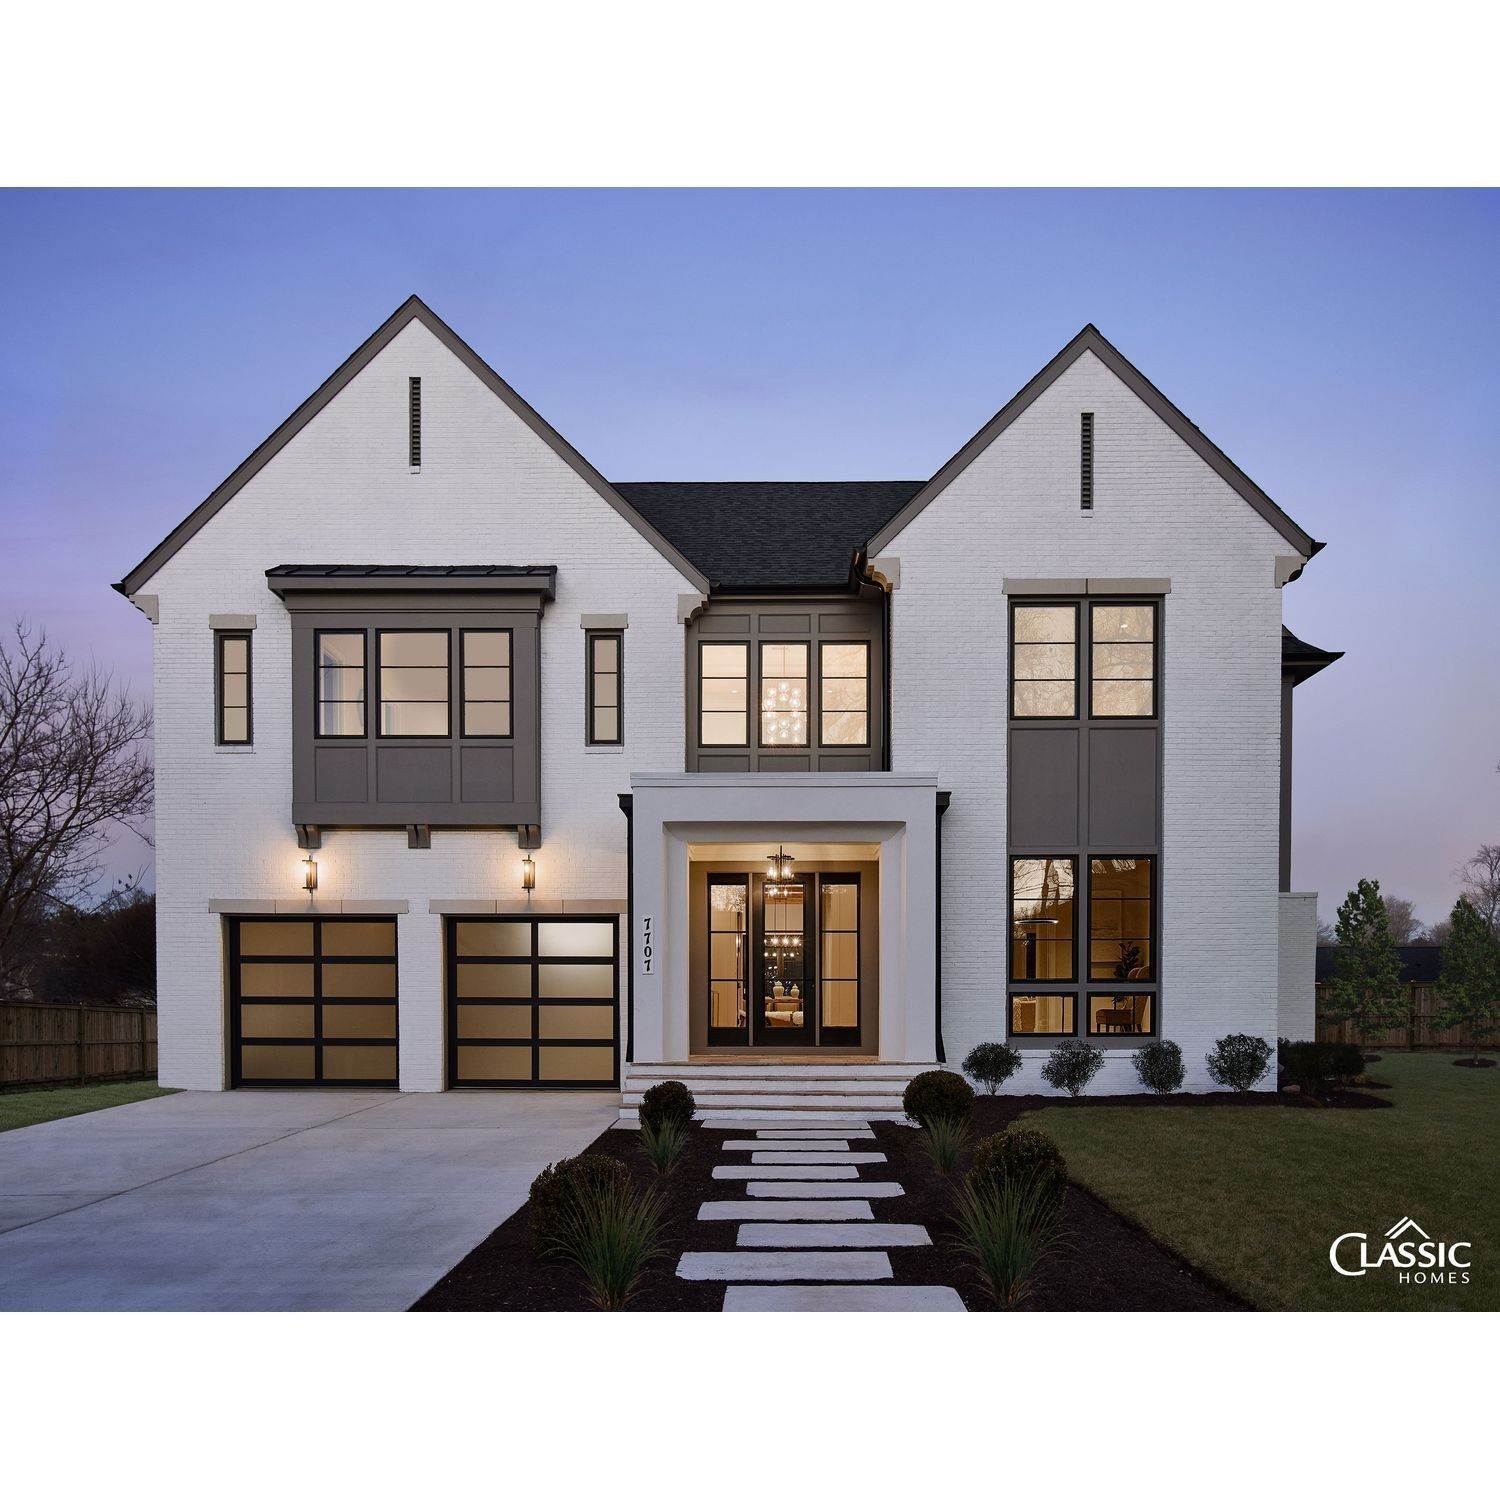 Classic Homes of Maryland - Custom Home Builder (Bethesda) xây dựng tại Bethesda, MD 20817